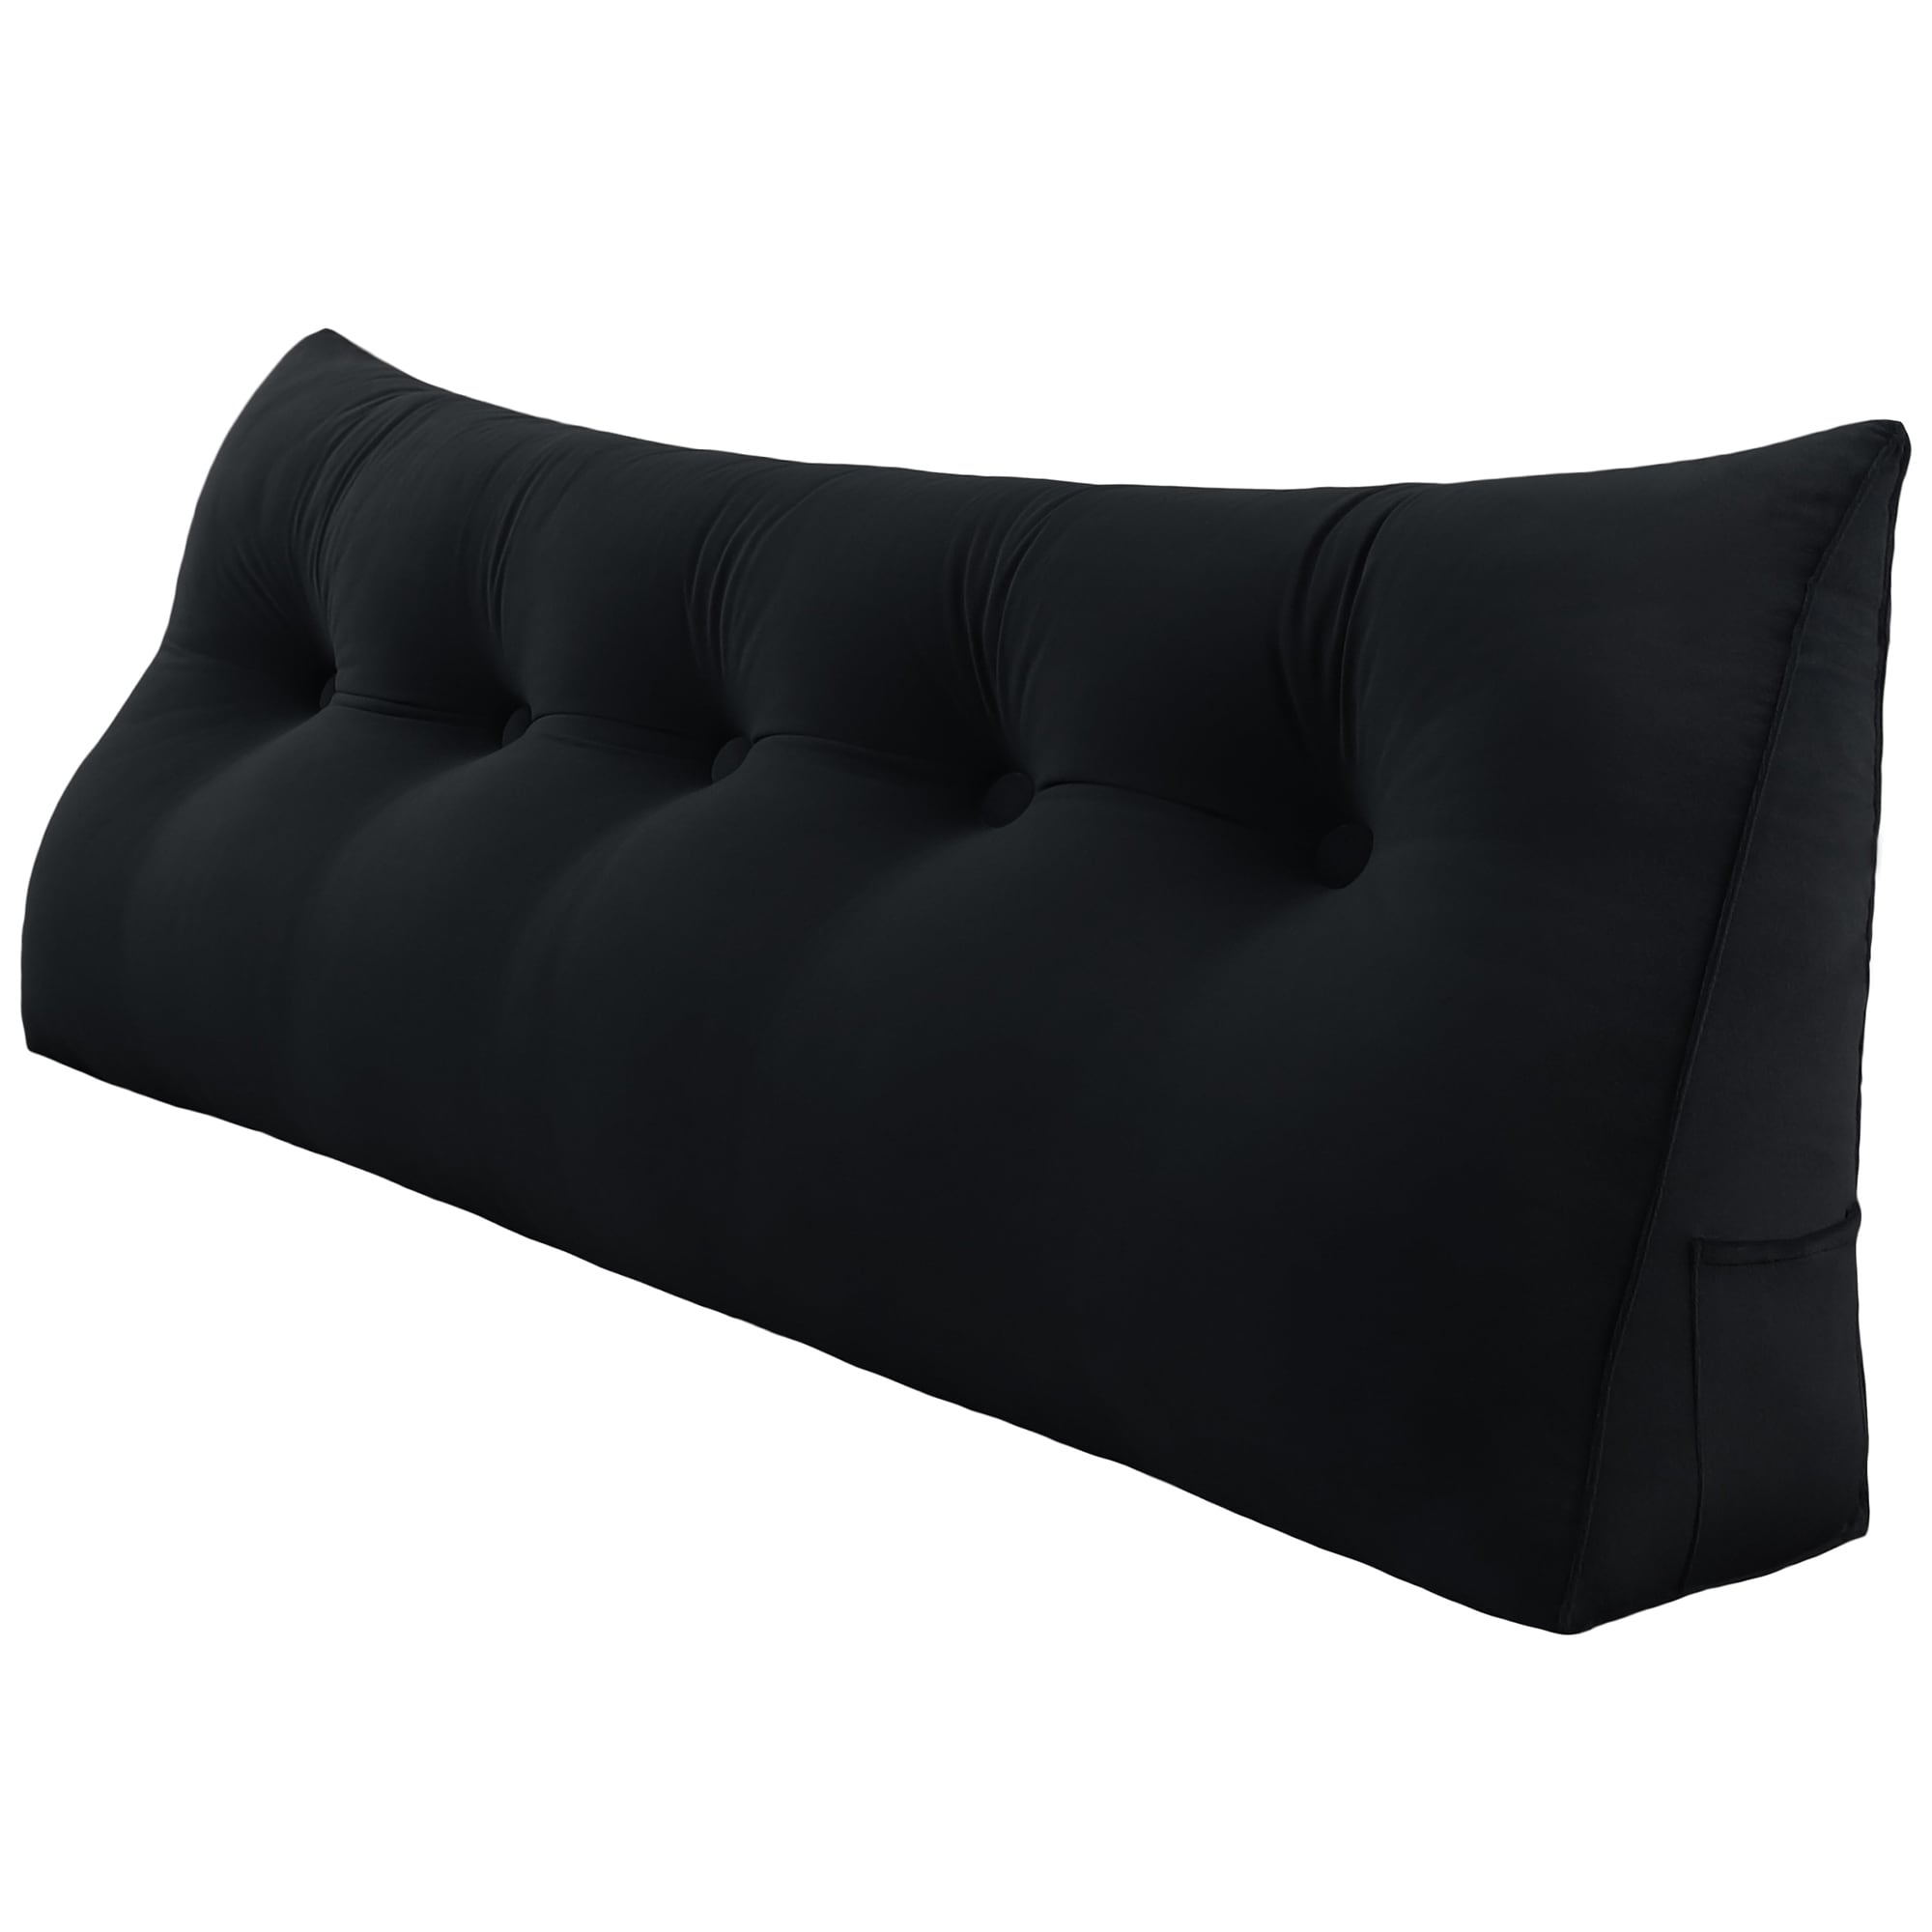 WOWMAX Bed Rest Wedge Bolster Headboard Back Support Pillow Velvet - On  Sale - Bed Bath & Beyond - 30214615